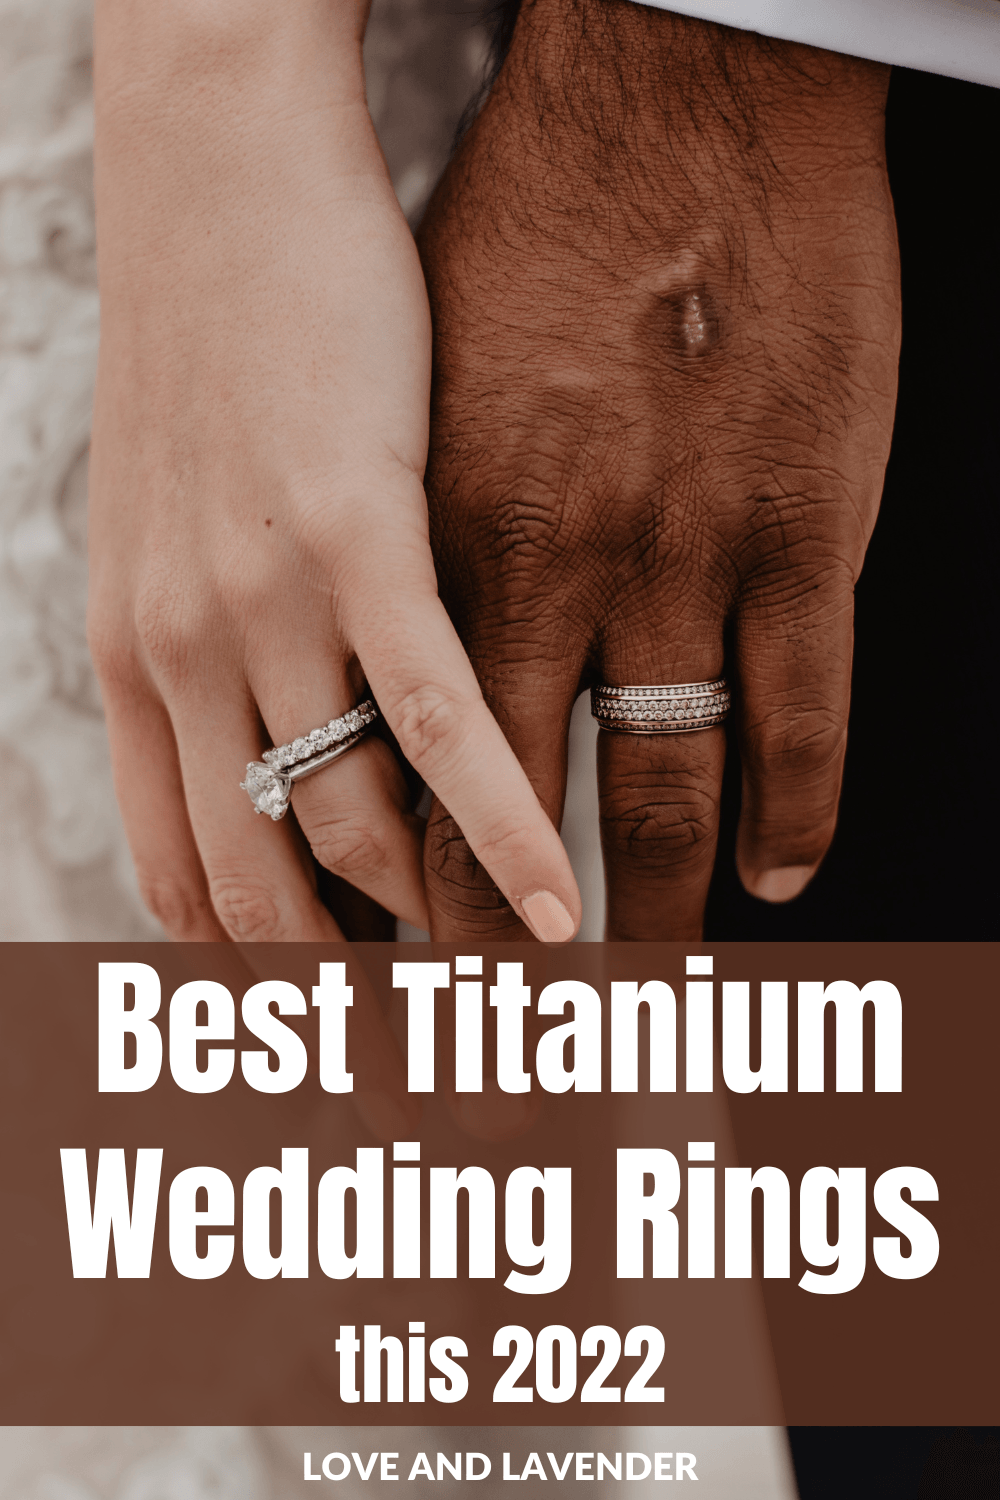 Titanium is a common trade term for an alloy that is usually 80% to 100% pure titanium. Worn as wedding bands, it has several advantages over gold and silver. There is more room for personalization and engraving, it’s not as easily damaged, it doesn’t need to be polished or cleaned as often, and it costs less!